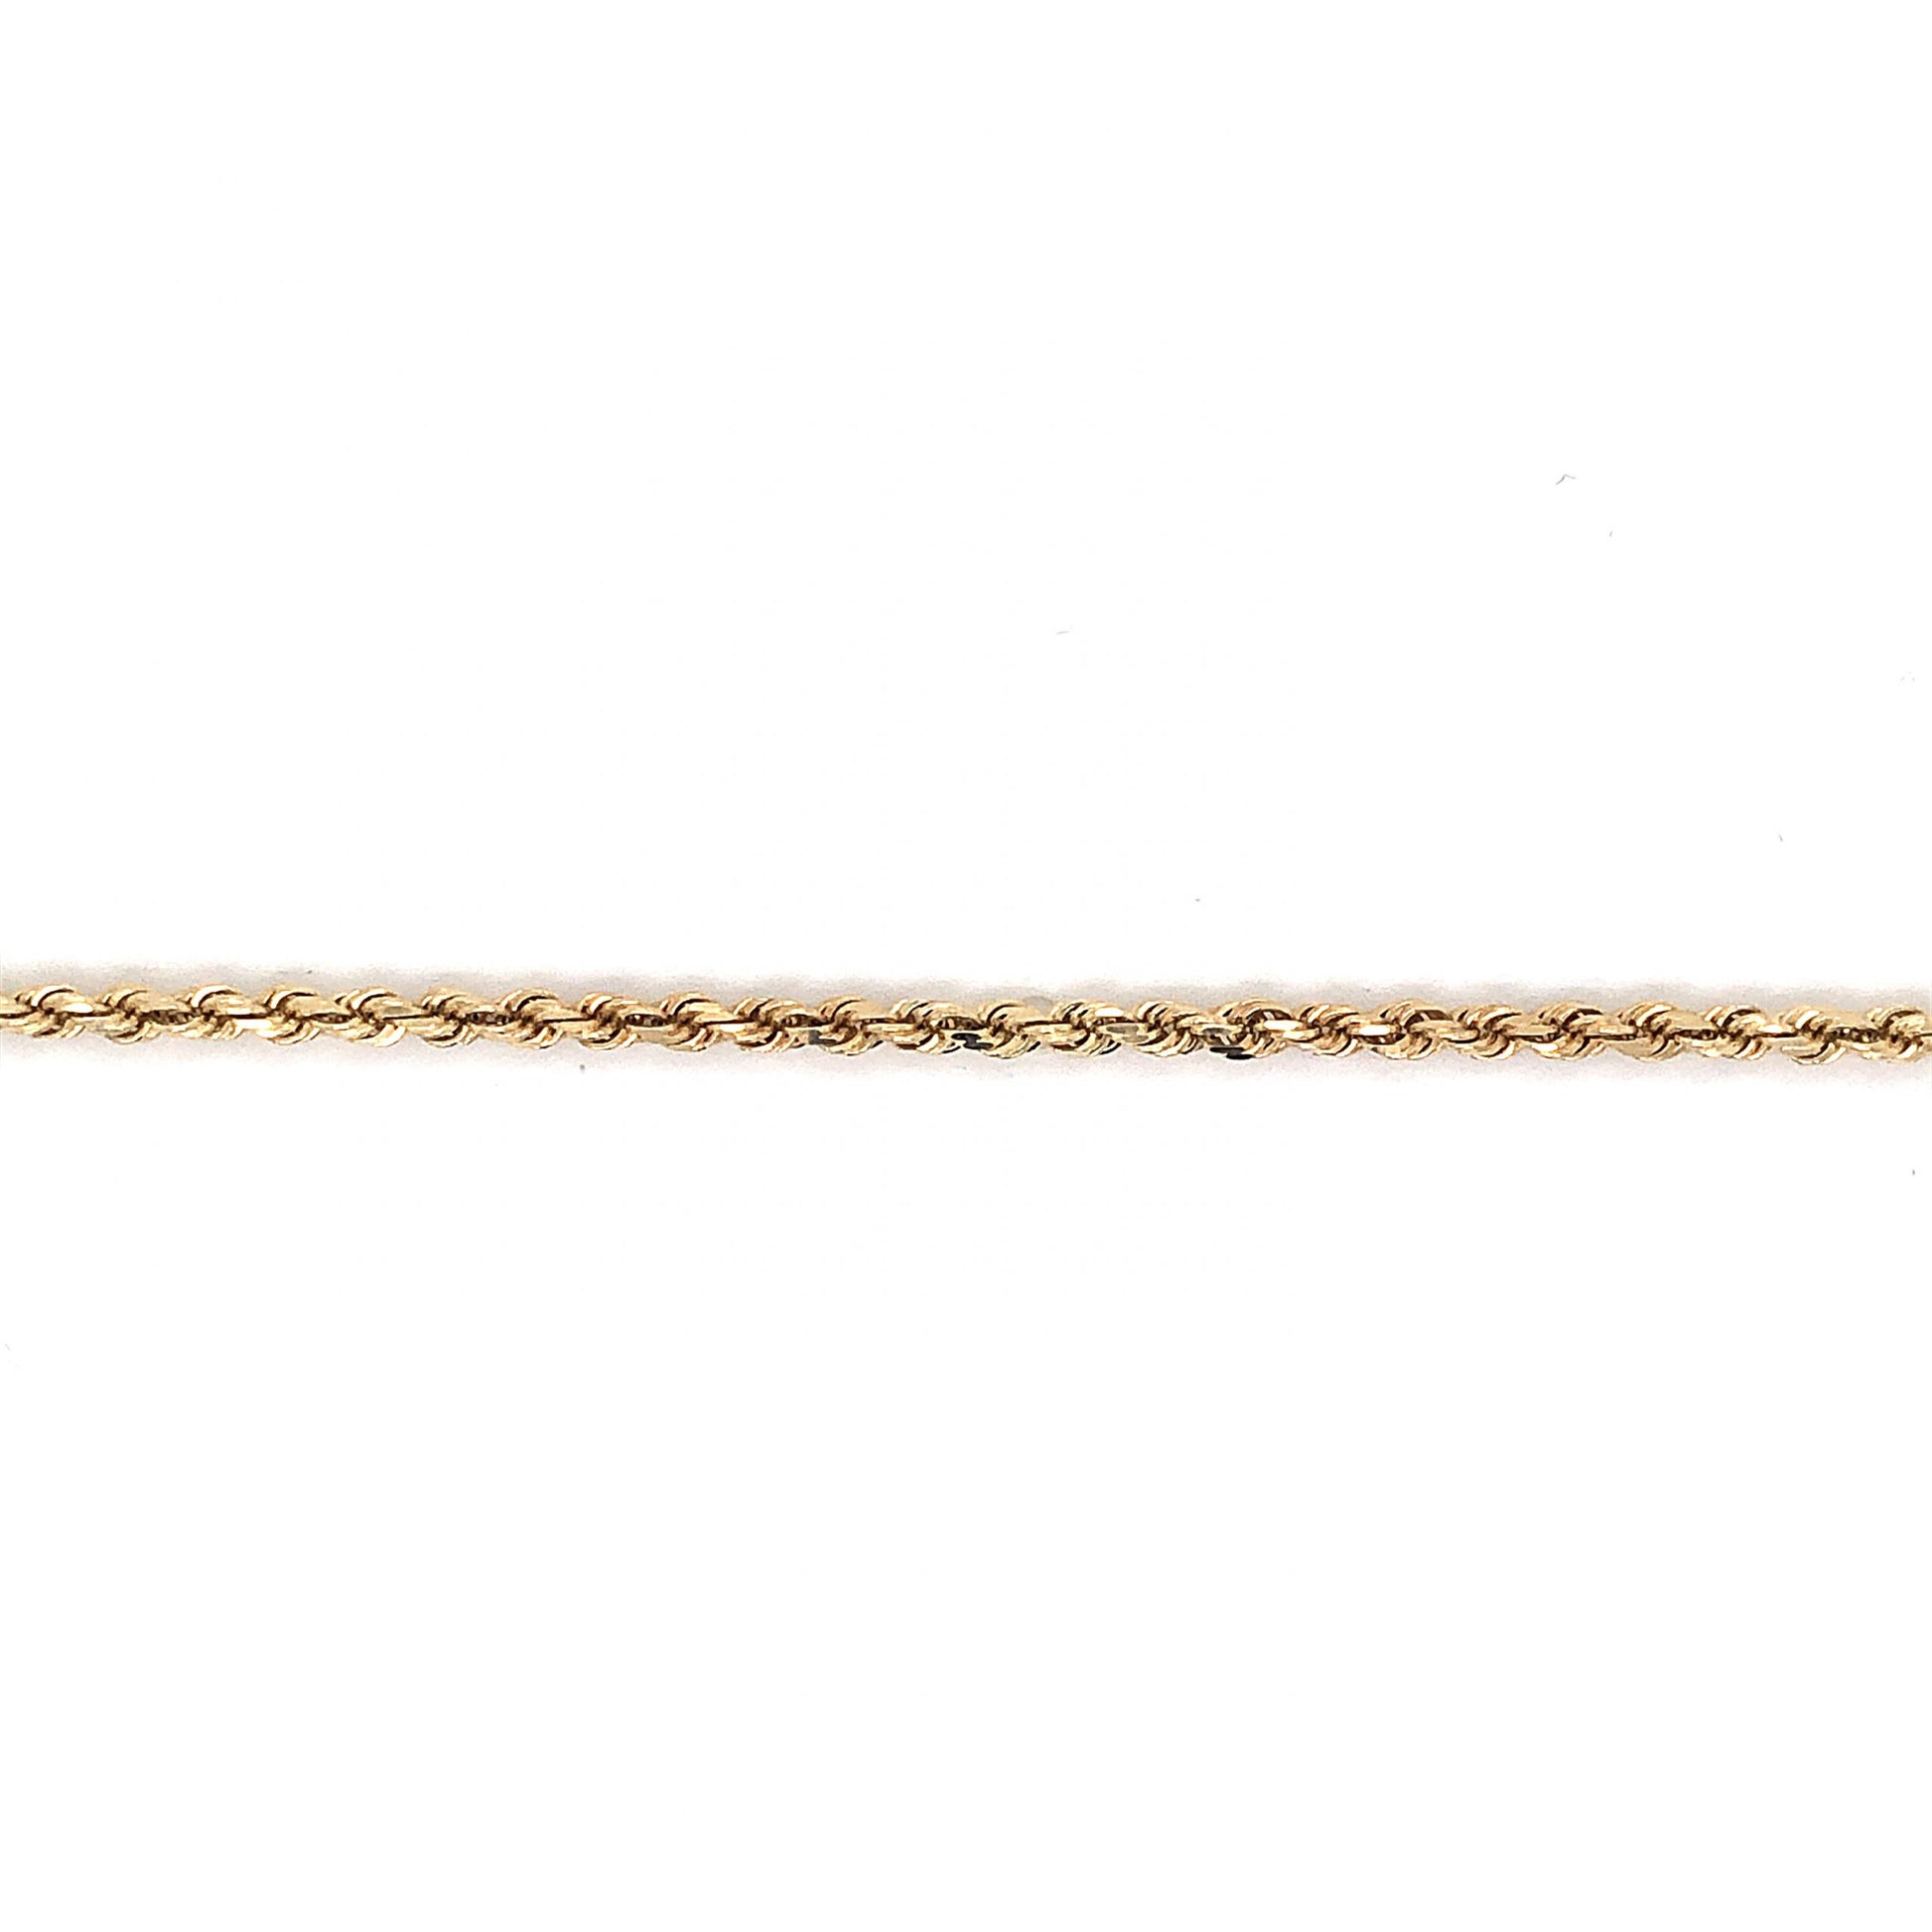 Rope Chain Anklet in 14k Yellow GoldComposition: 14 Karat Yellow Gold Total Gram Weight: 4.6 g Inscription: 14K Kitsinian
      